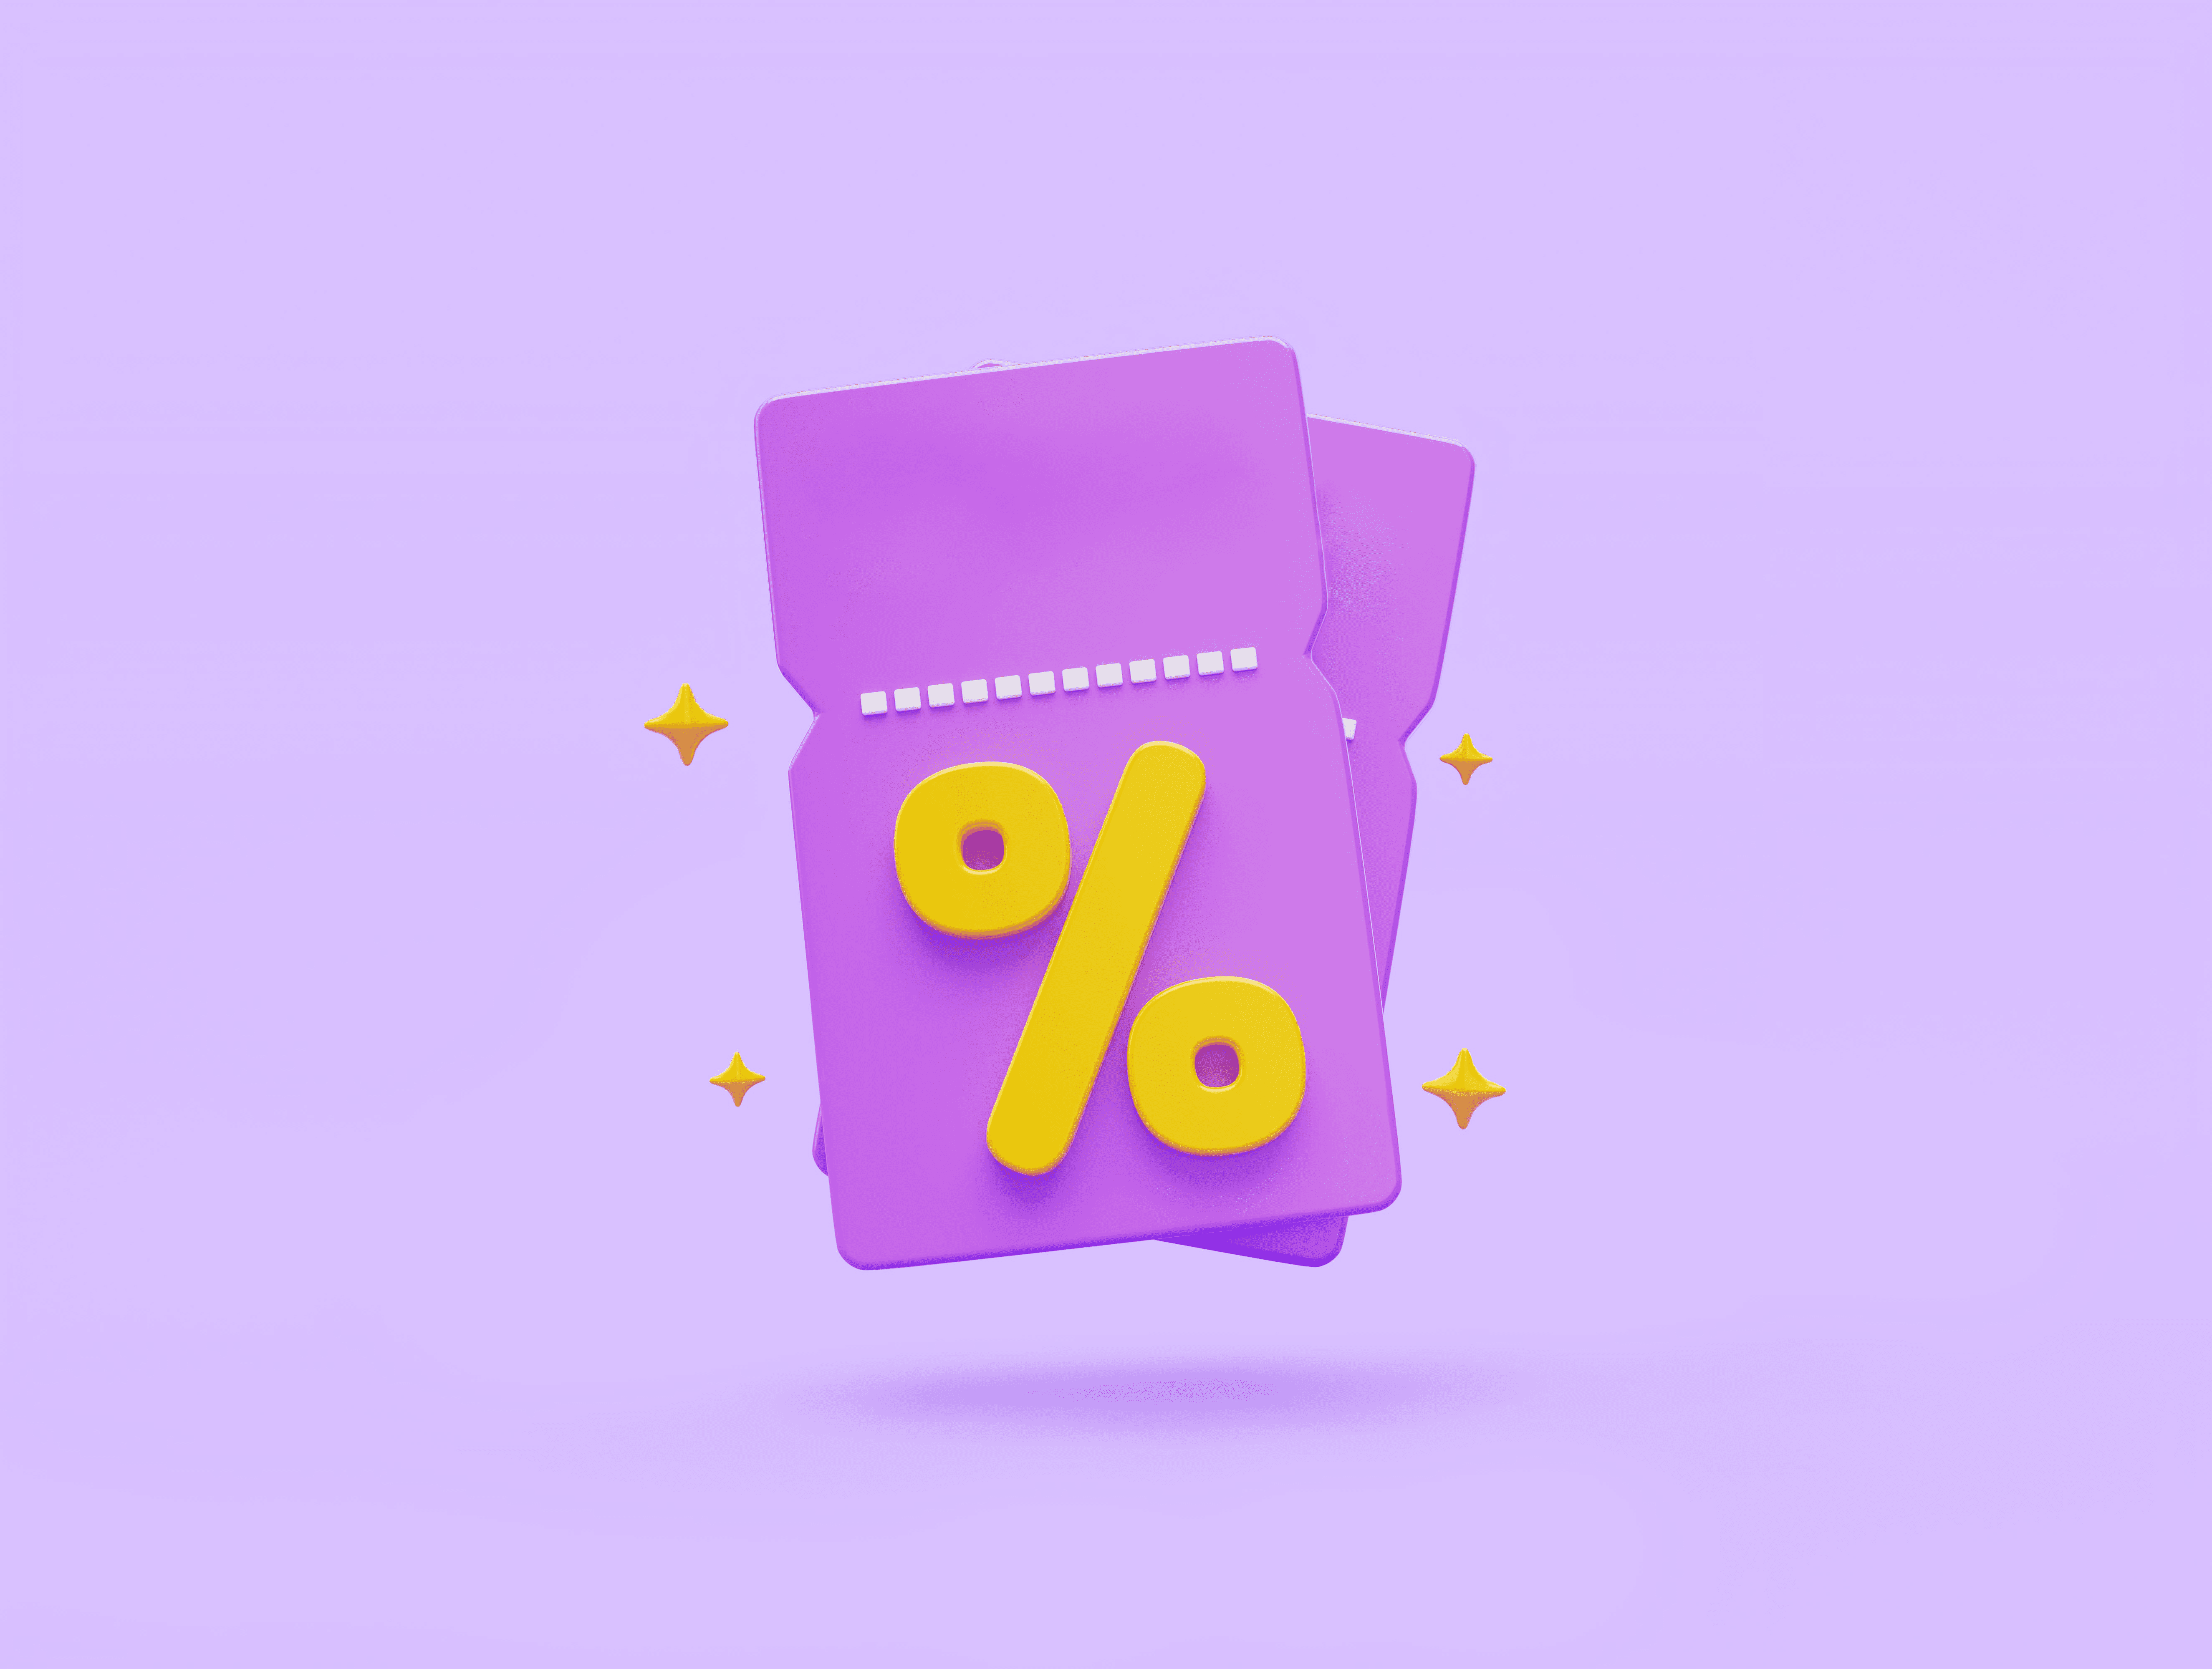 voucher icon sale buy special discount promotion marketing purchase checkout e commerce online shopping 3d illustration32 1